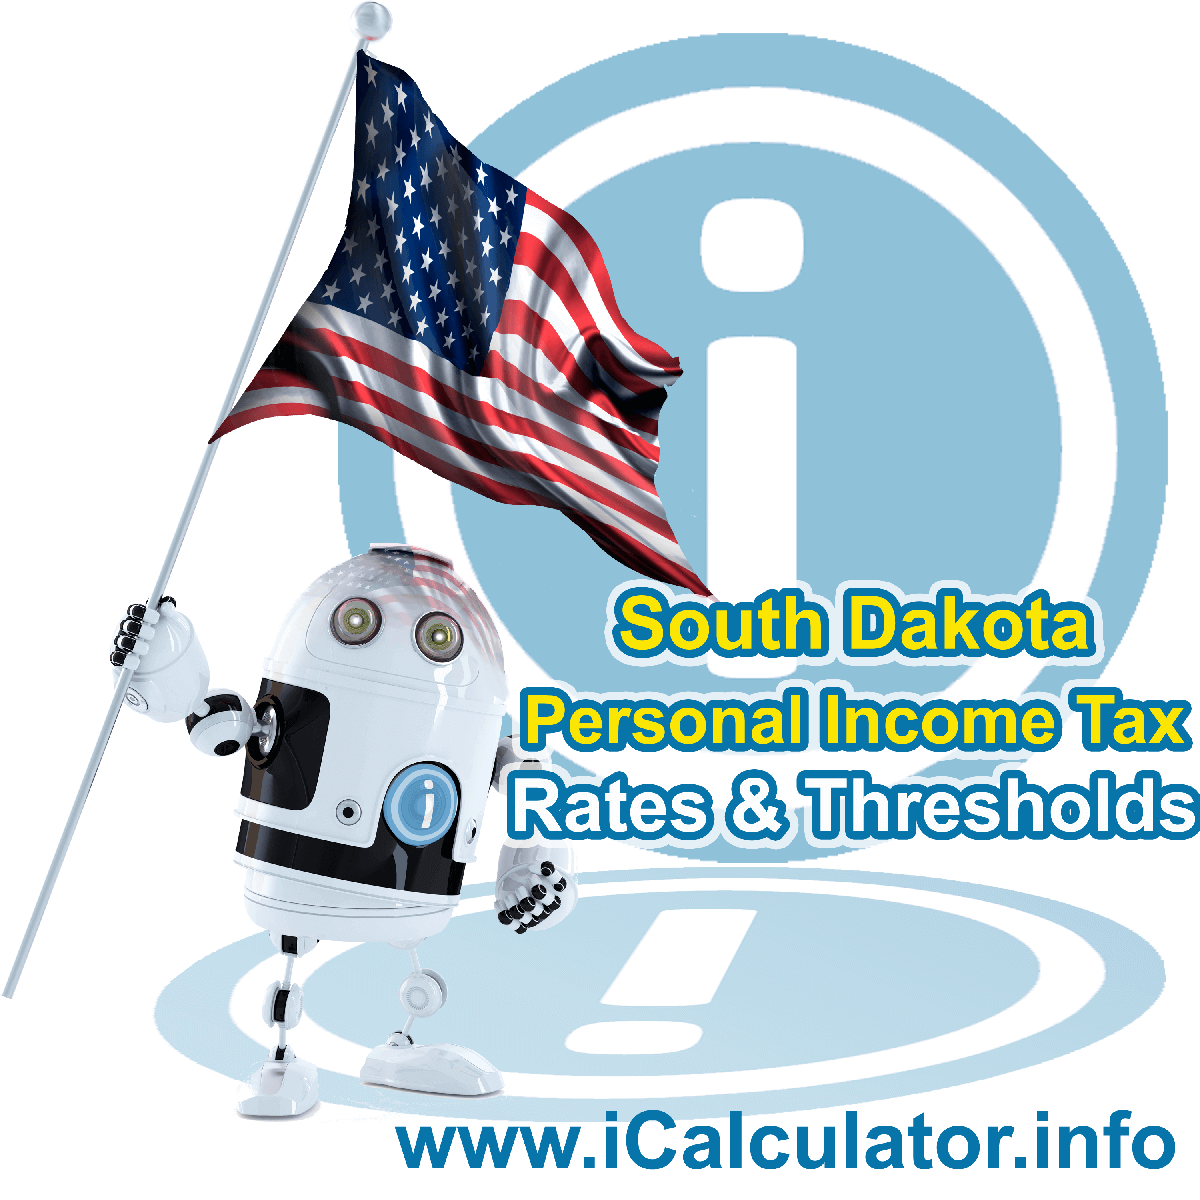 South Dakota State Tax Tables 2022. This image displays details of the South Dakota State Tax Tables for the 2022 tax return year which is provided in support of the 2022 US Tax Calculator